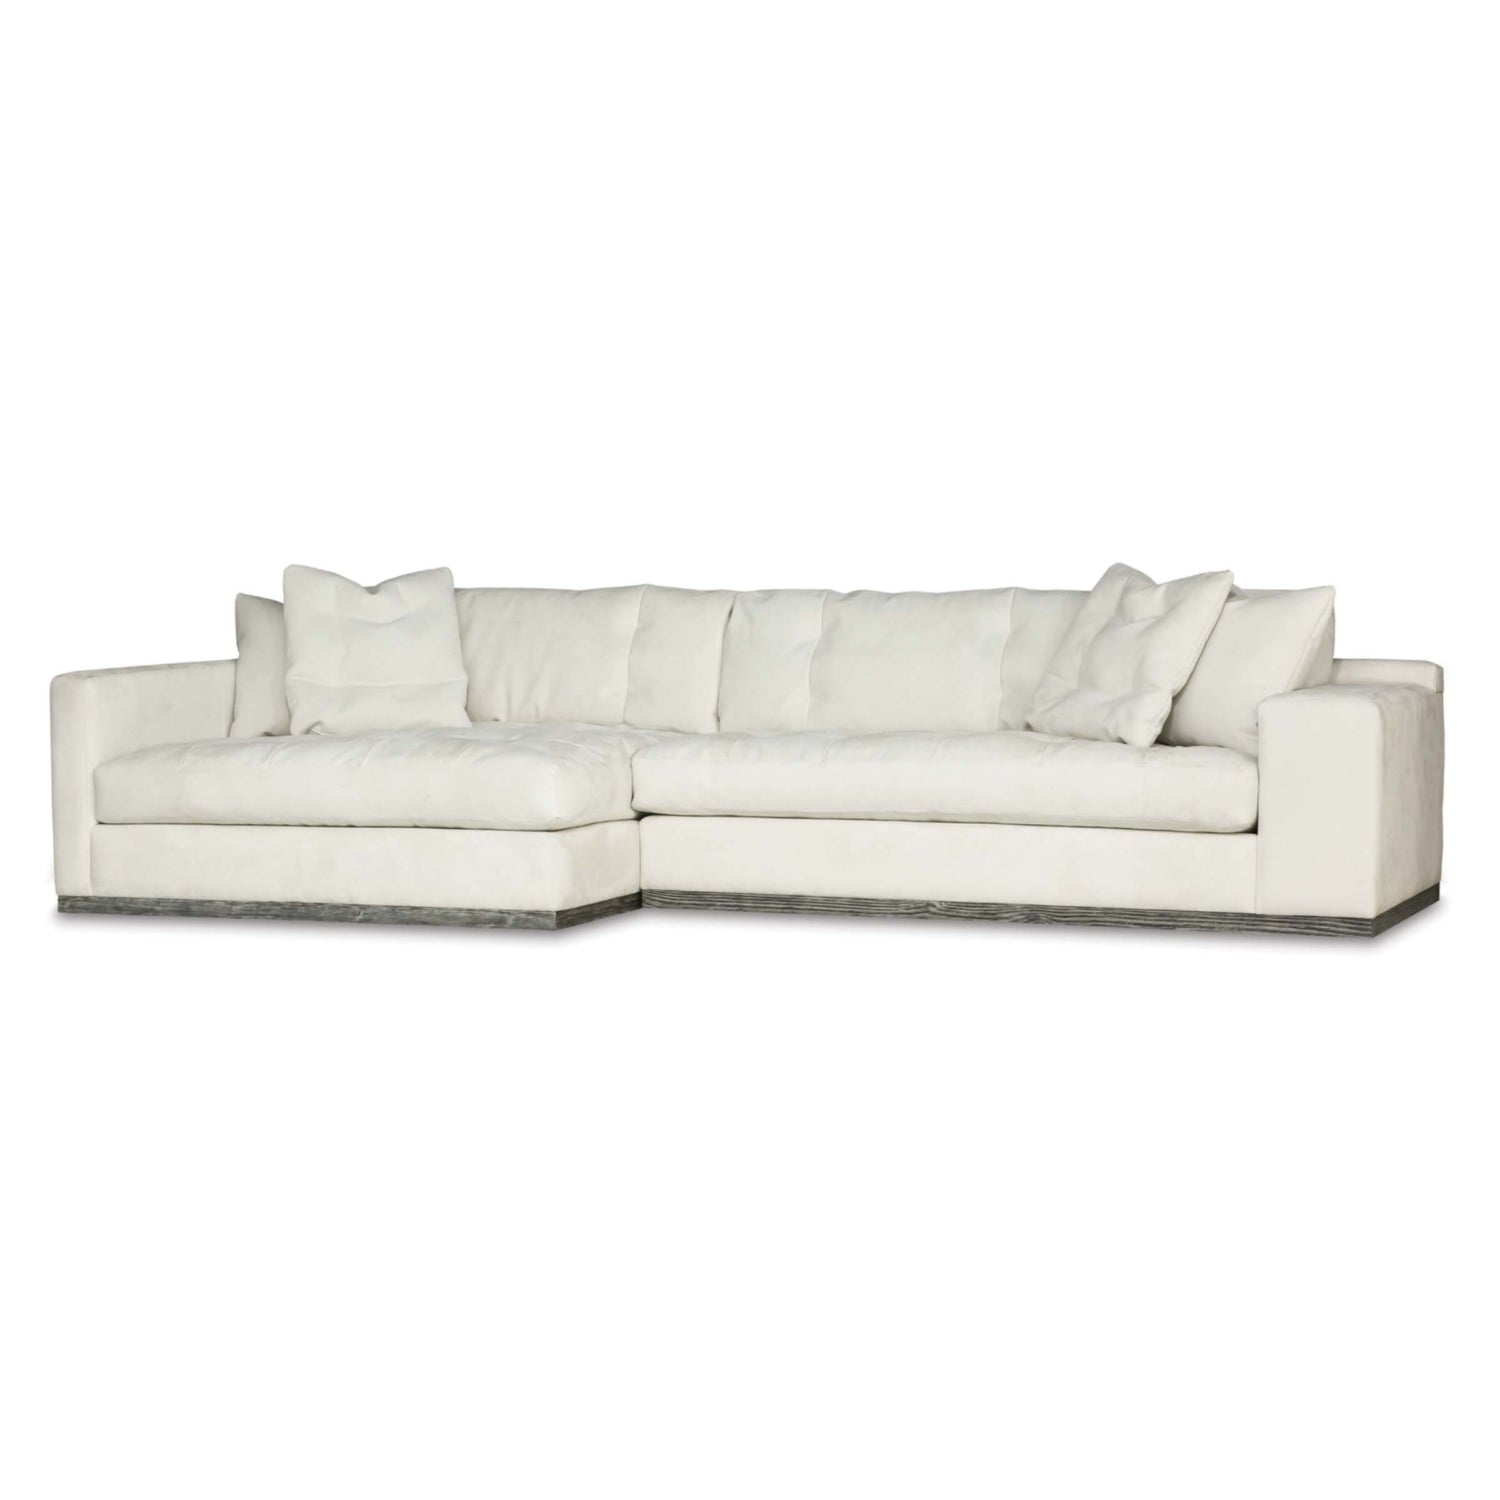 Eleanor Rigby Suzie Sectional (Sofa + Chaise)